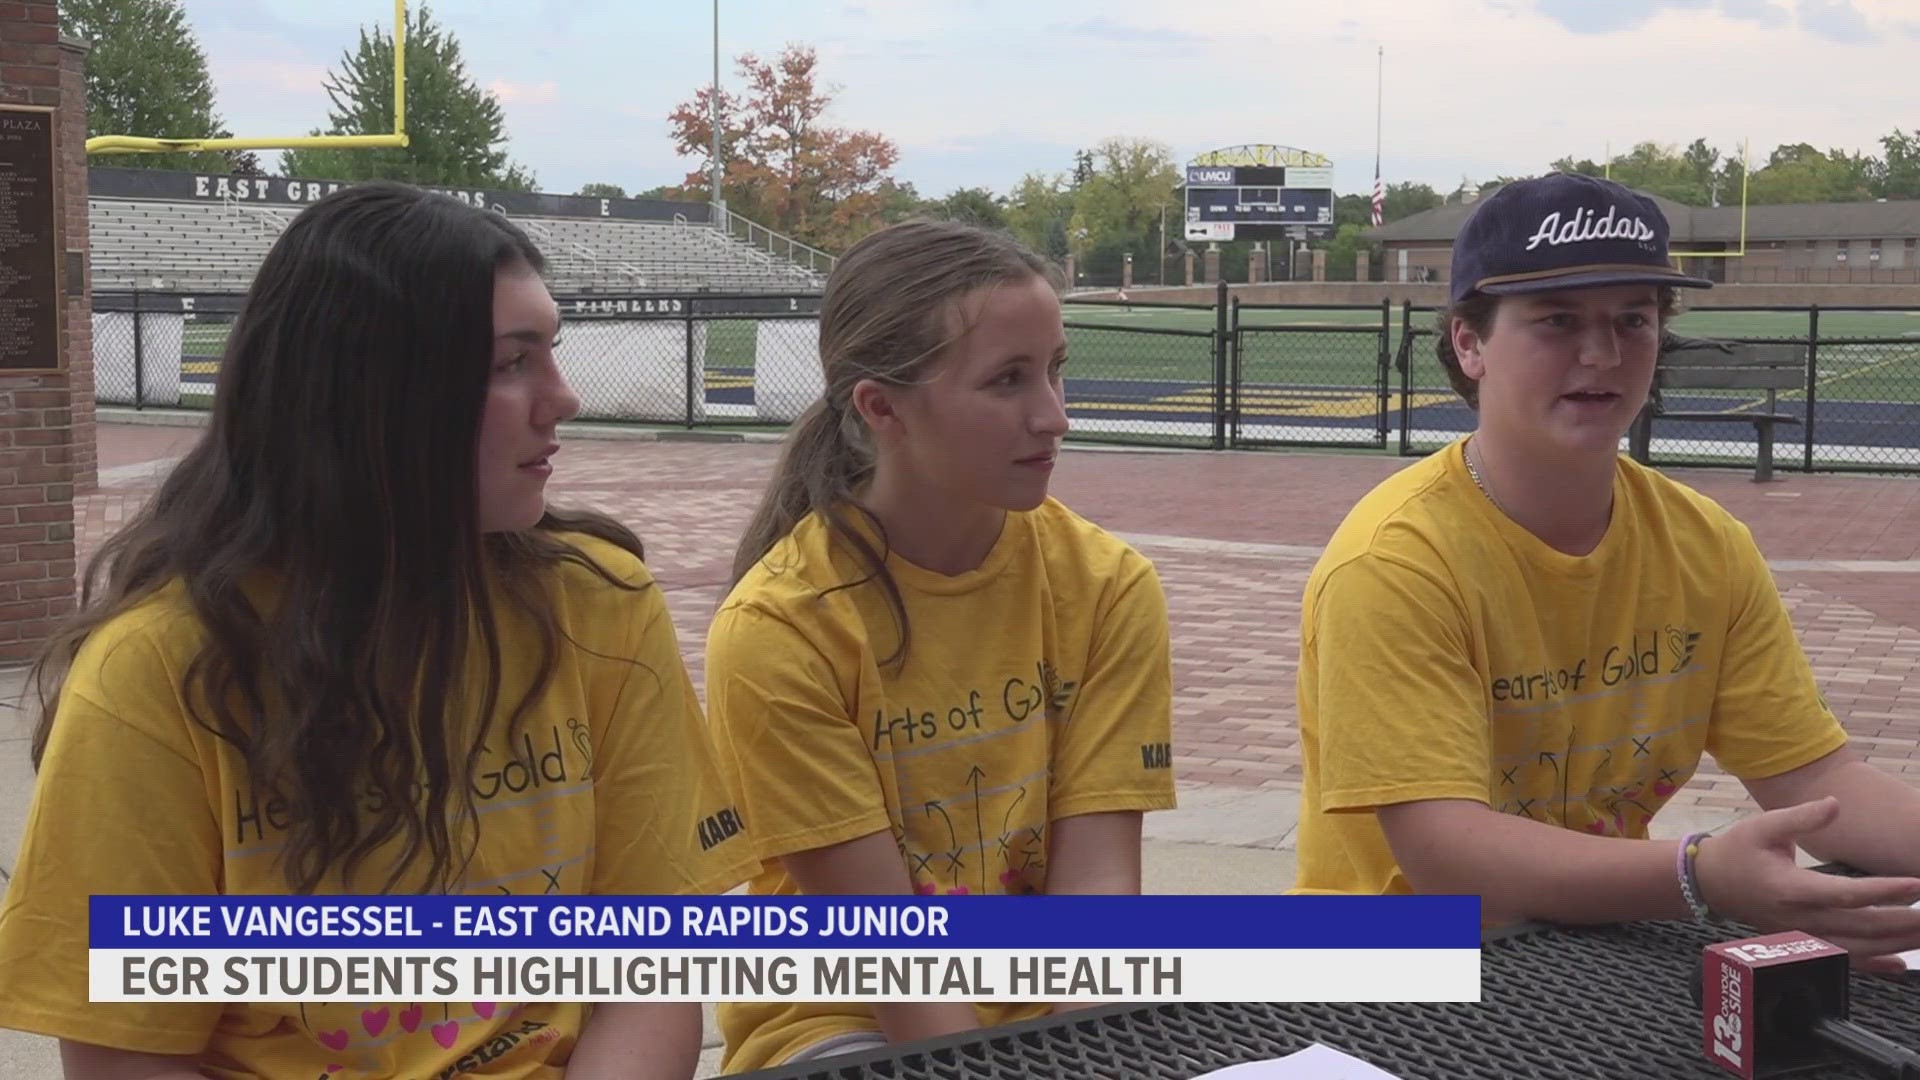 The 2023 Hearts of Gold campaign will benefit an organization called "i understand" which focuses on mental health awareness and suicide prevention.